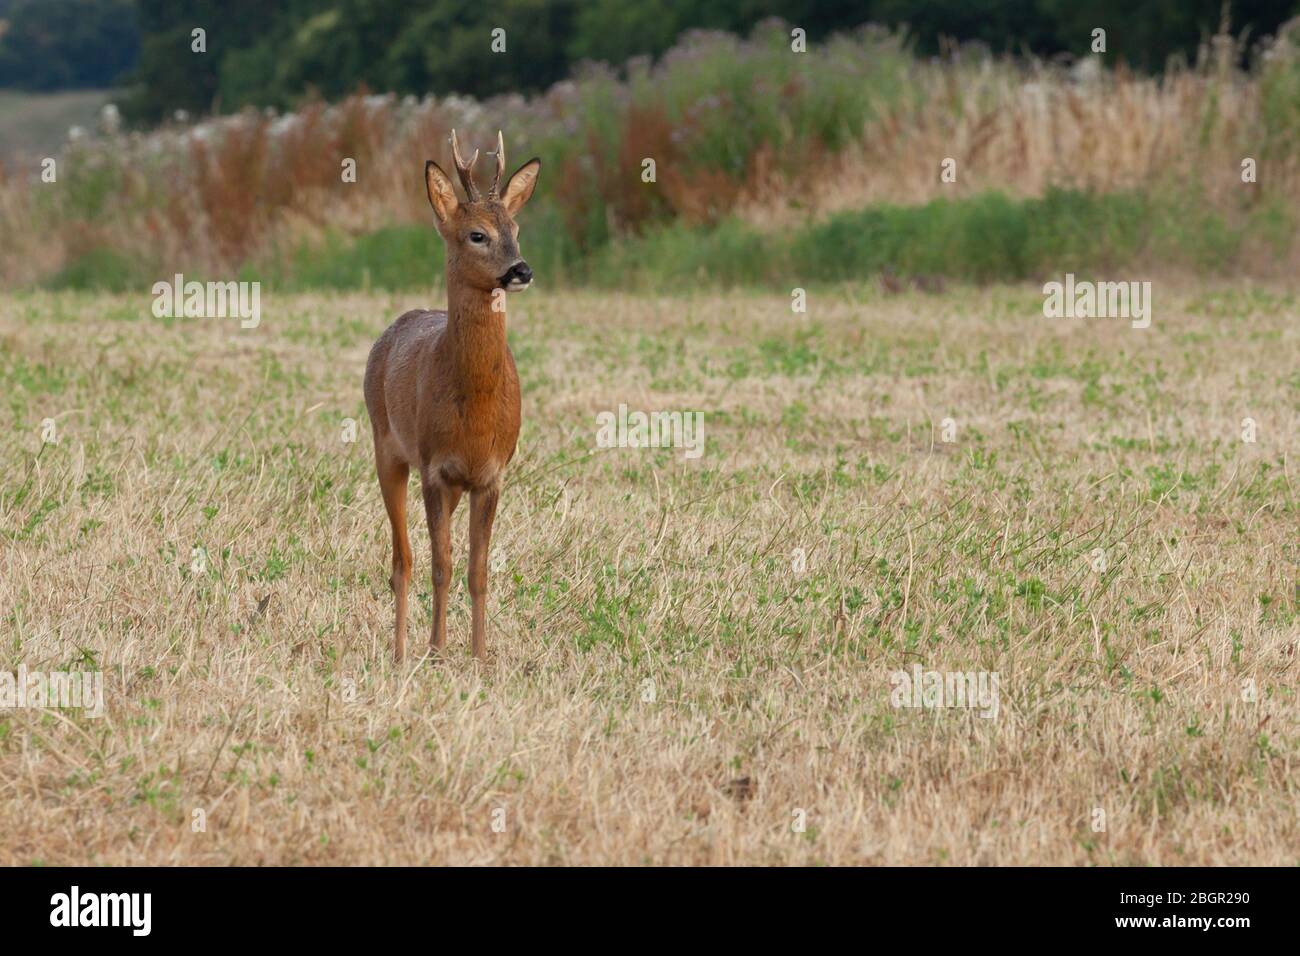 Young wild roe deer close up. Natural wildlife landscape with a single animal in a field. Stock Photo